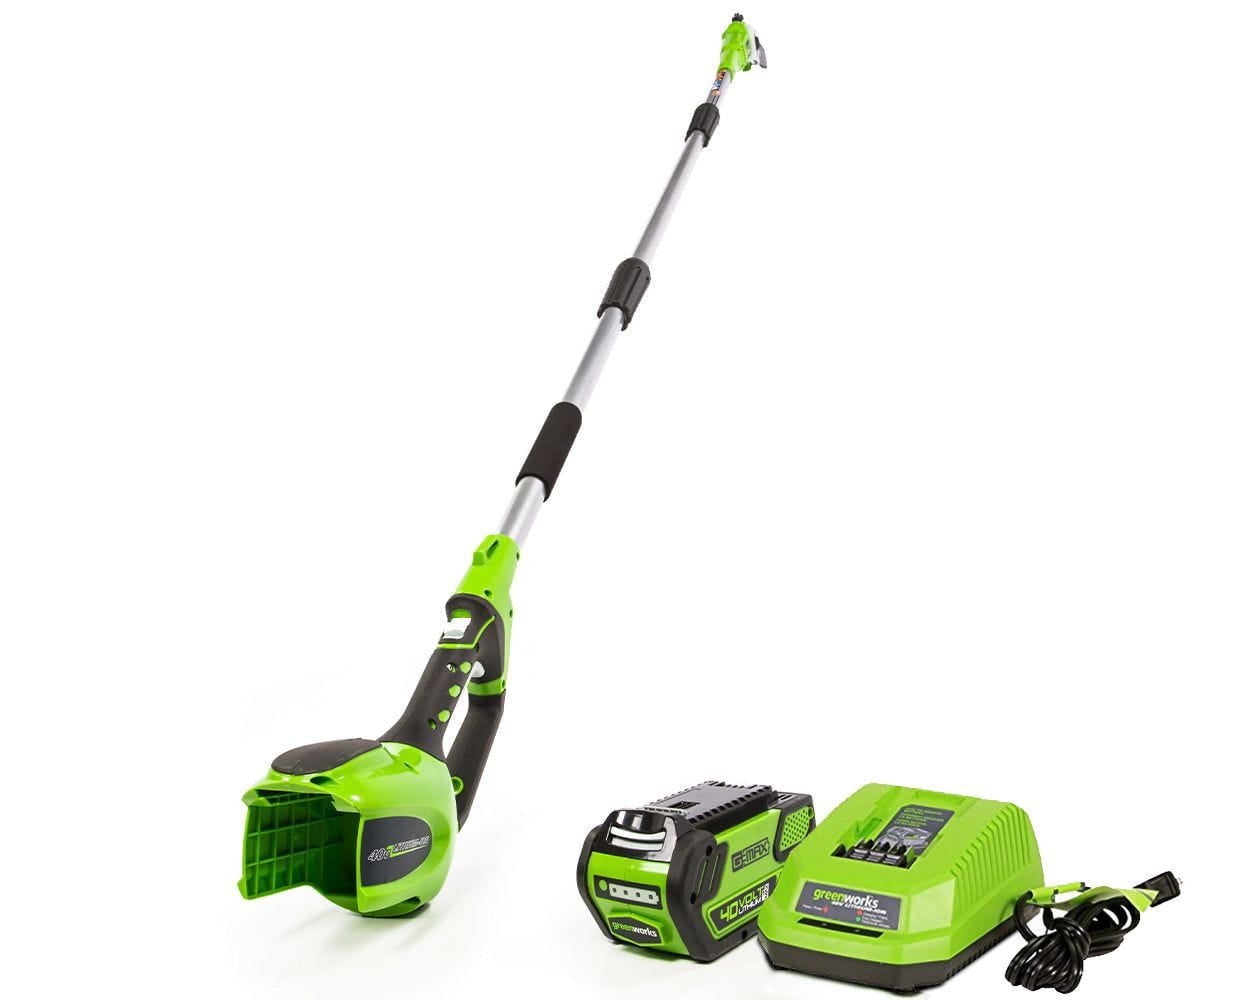 Battery Not Included 20302 Renewed Greenworks 8.5 40V Cordless Pole Saw 